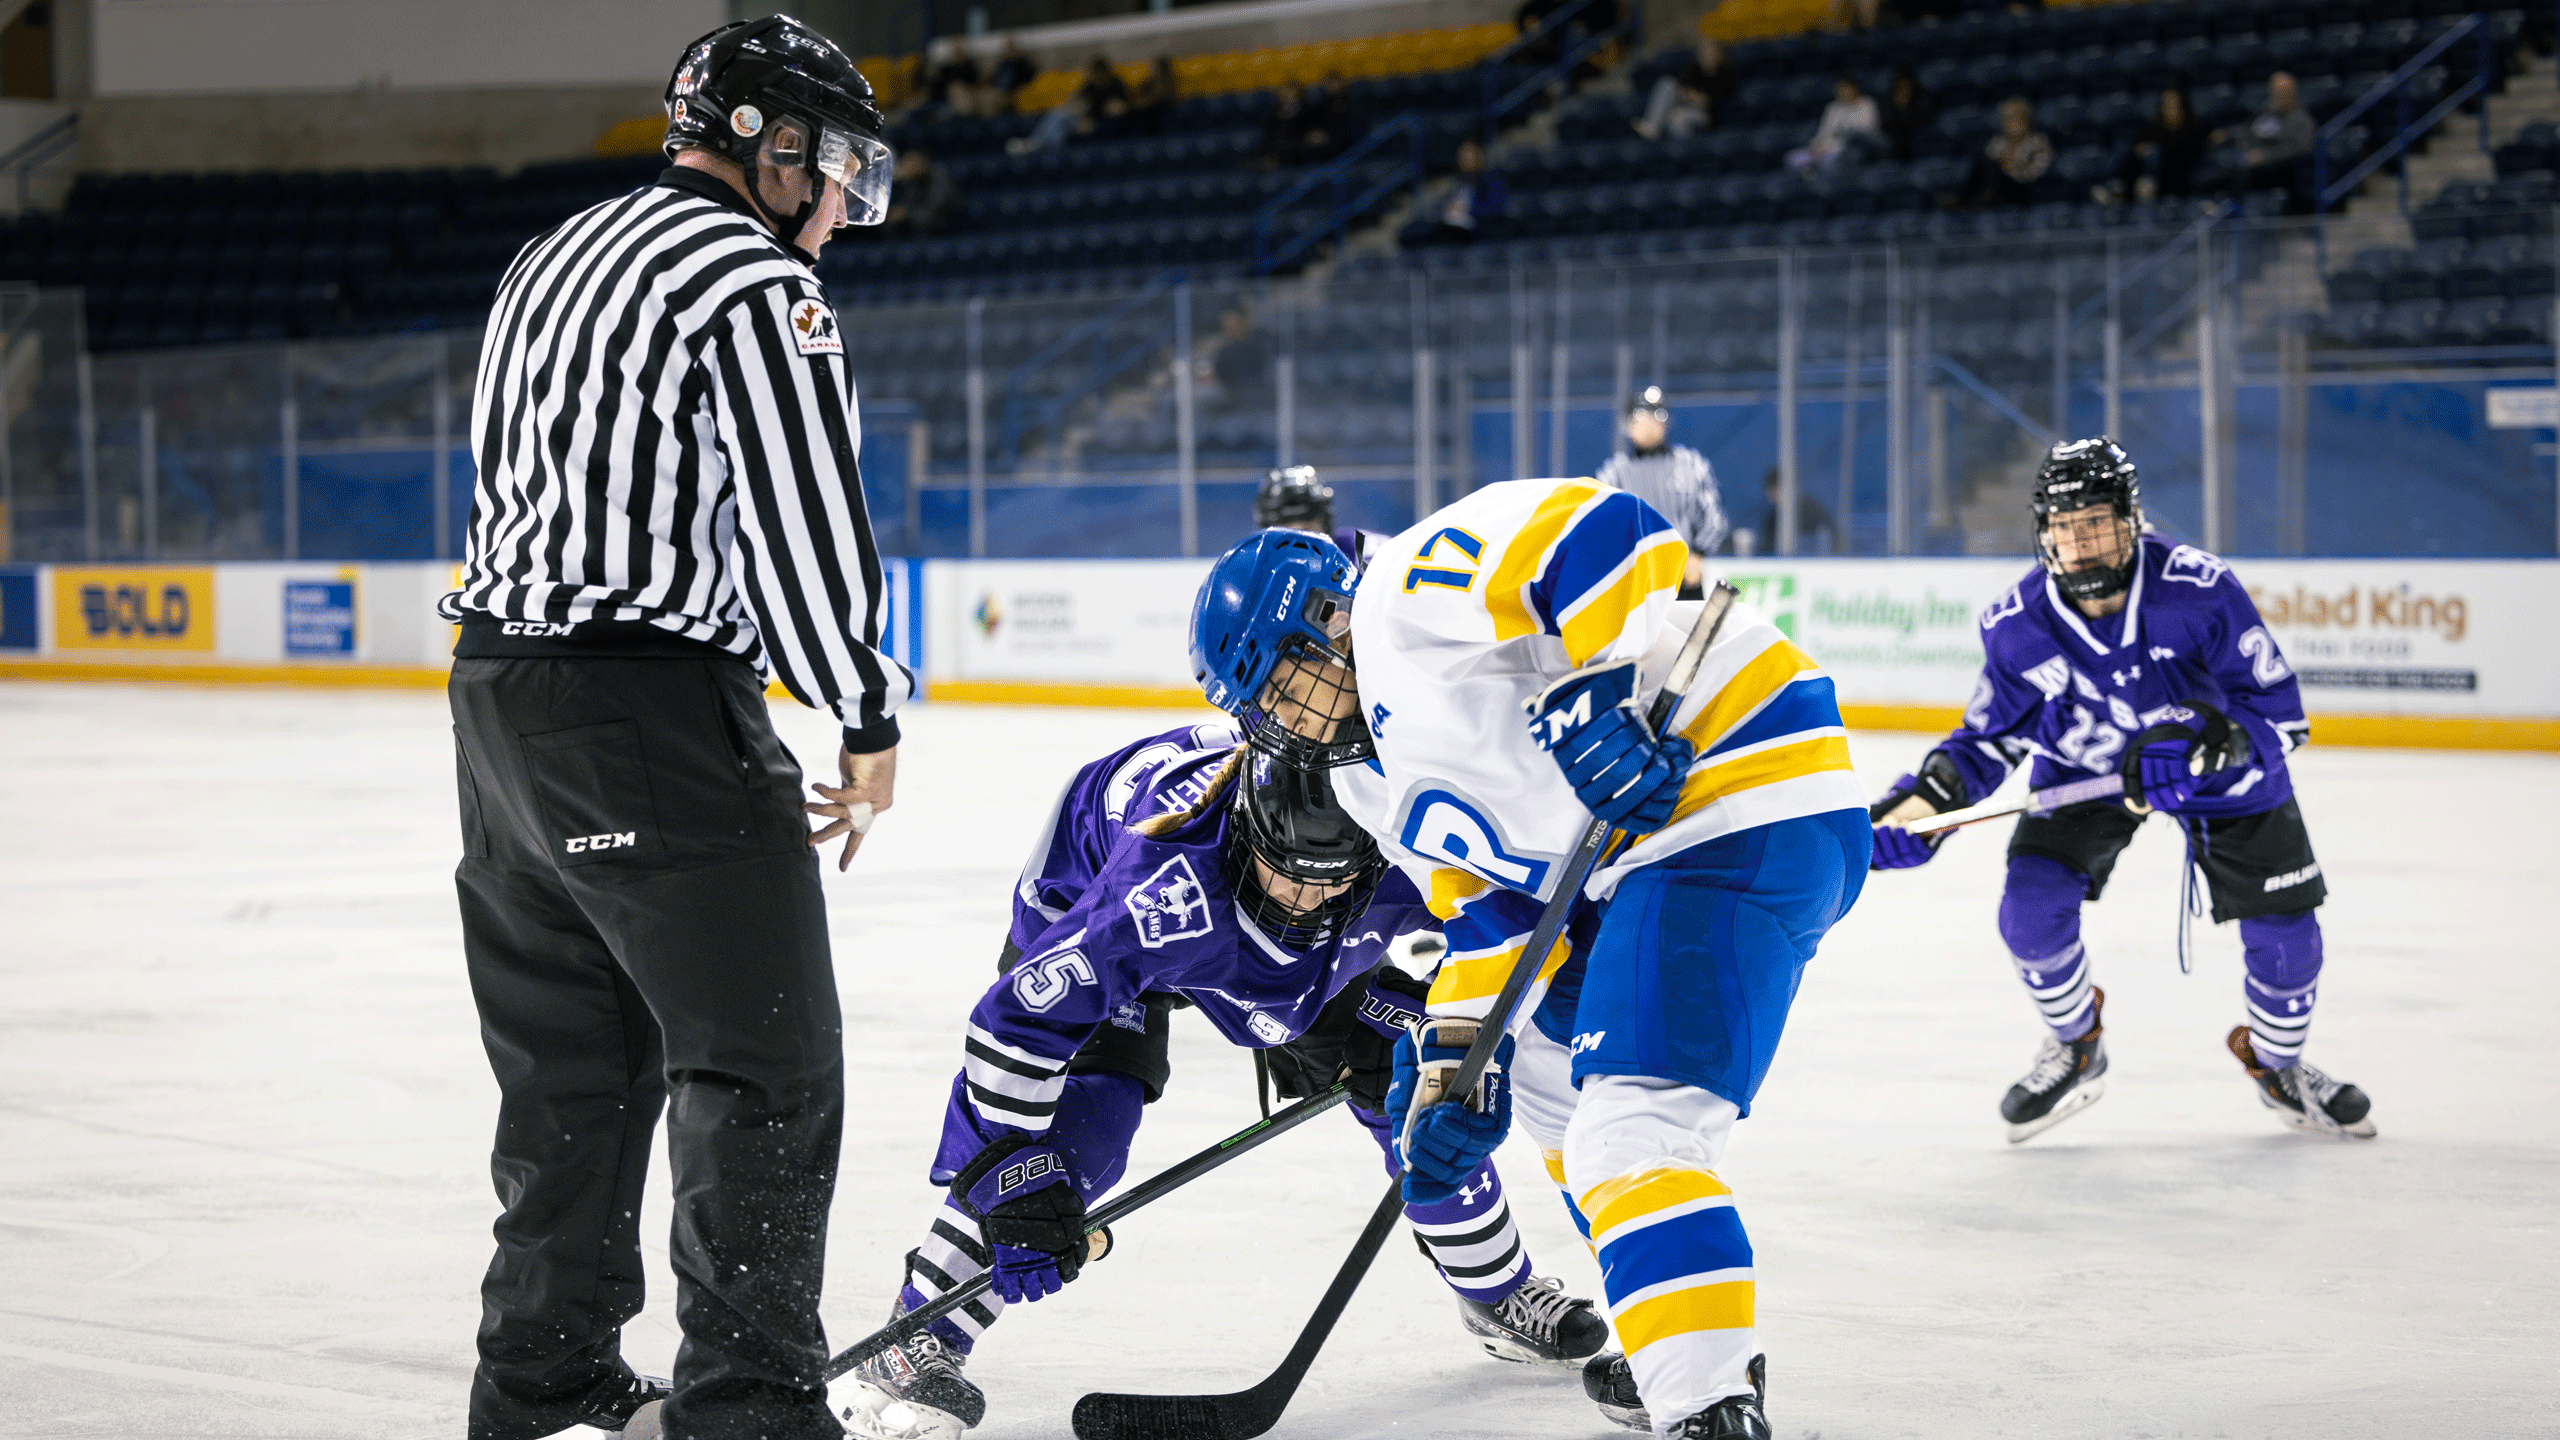 A hockey player in a white jersey battles with a player in a purple jersey